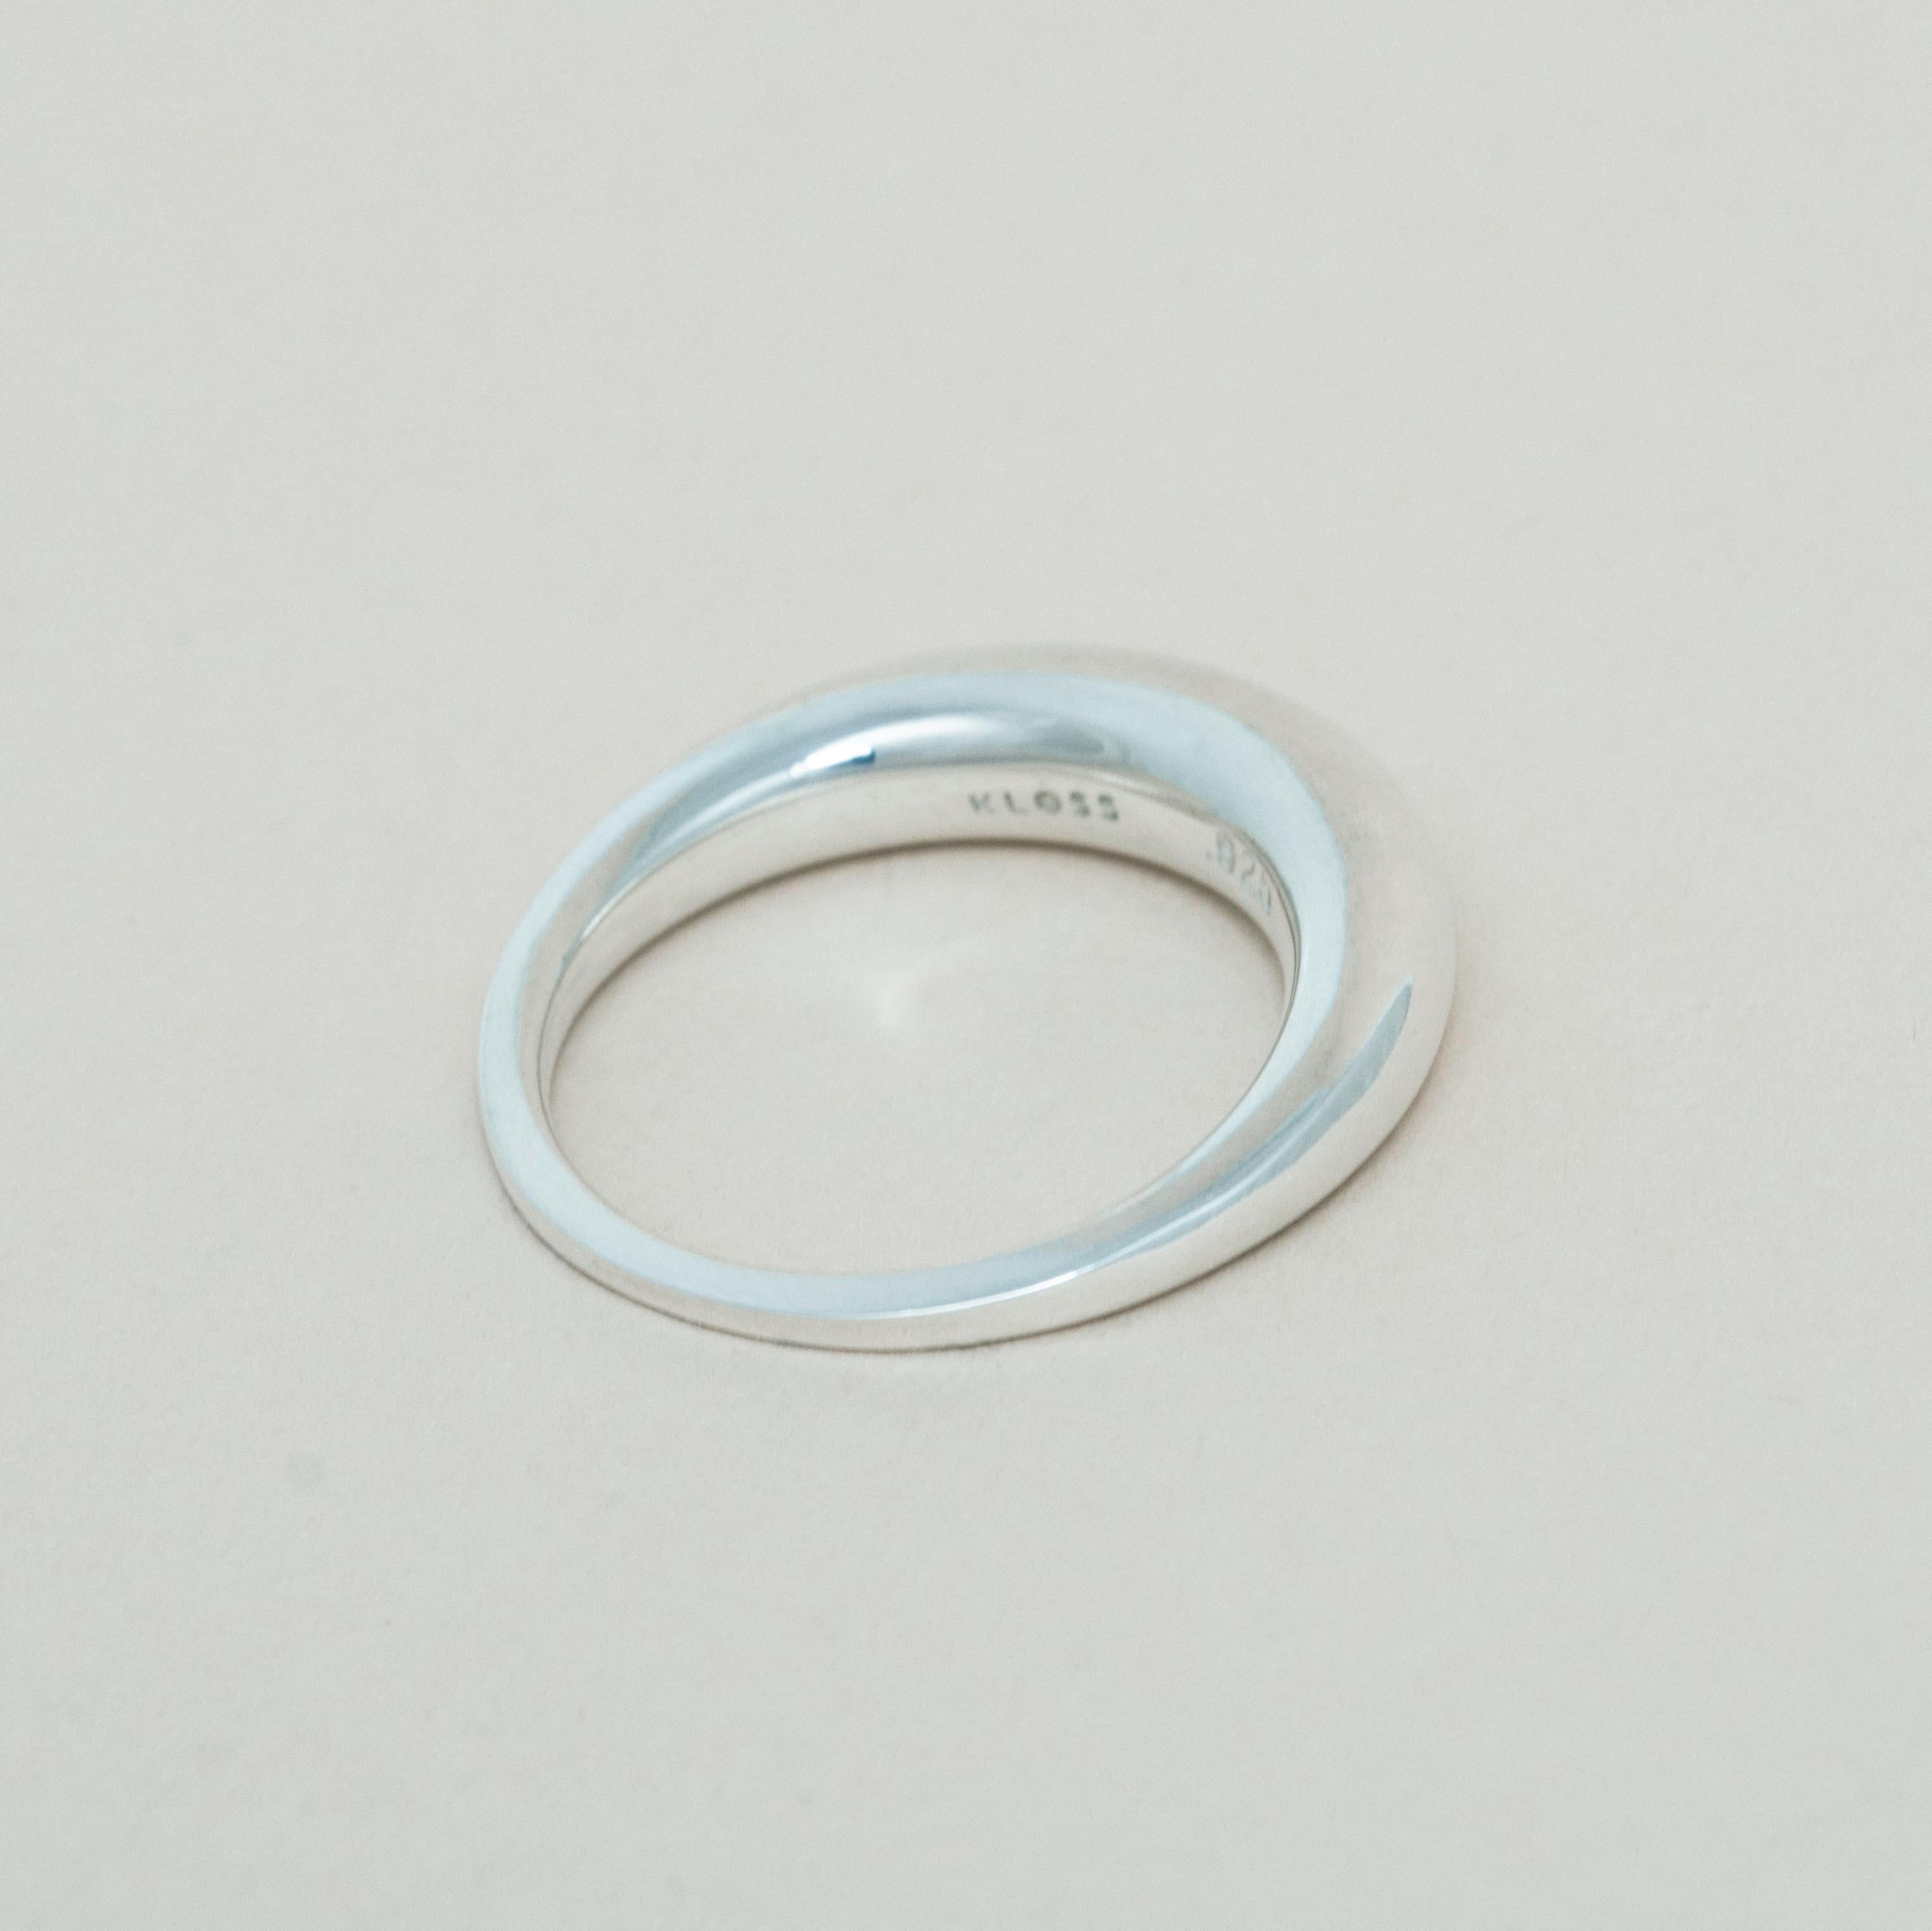 The Revolution Circle ring steadily cycles from a unique square band to a perfectly circular top and back again. As the square base flows into a lush organic statement, this piece reminds us to enjoy life’s transitional interludes and embrace